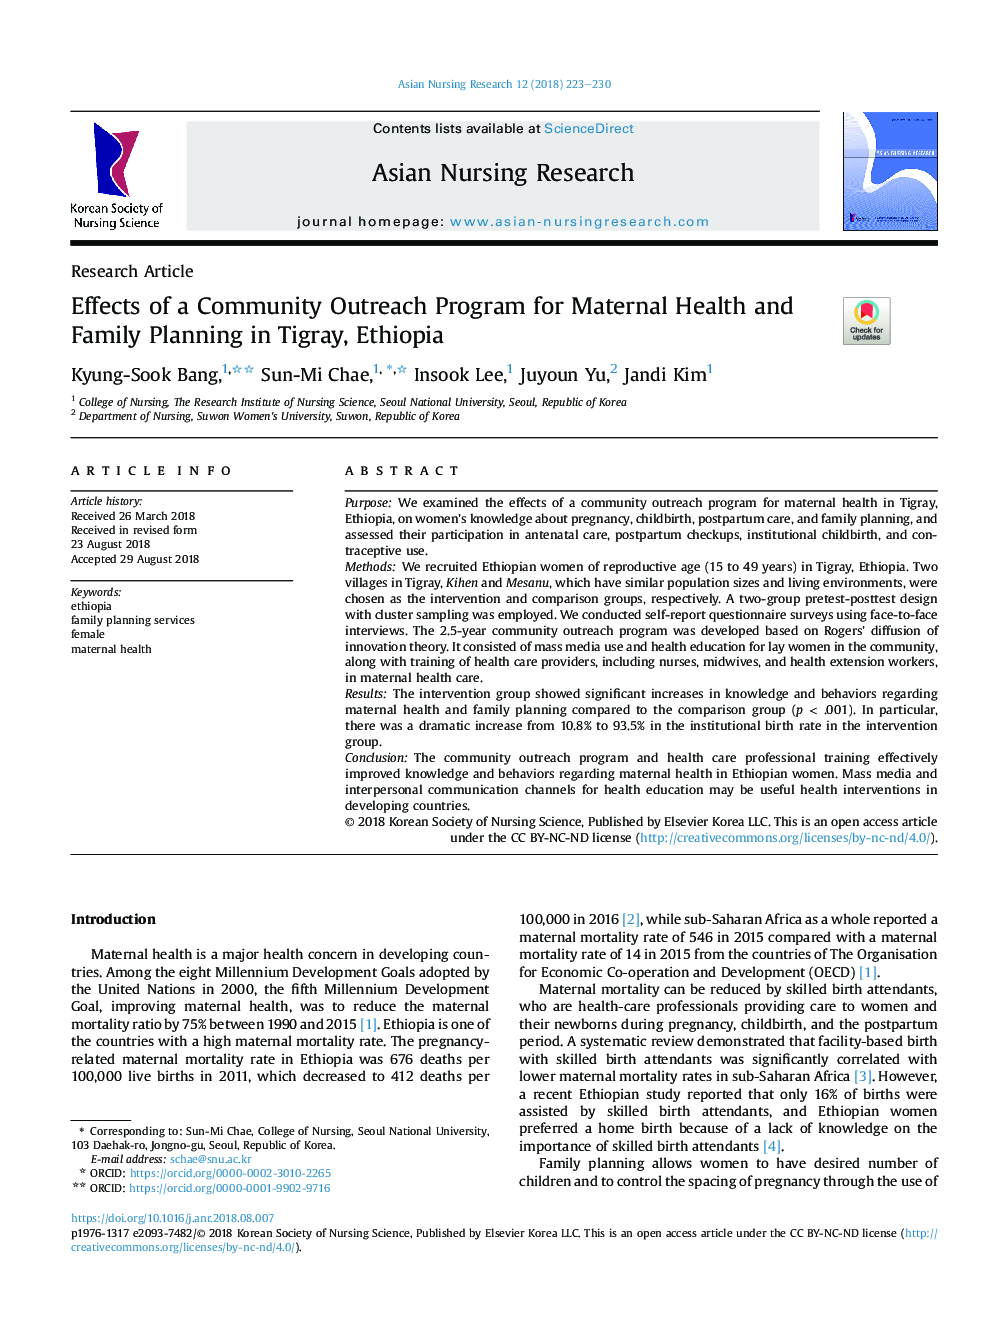 Effects of a Community Outreach Program for Maternal Health and Family Planning in Tigray, Ethiopia